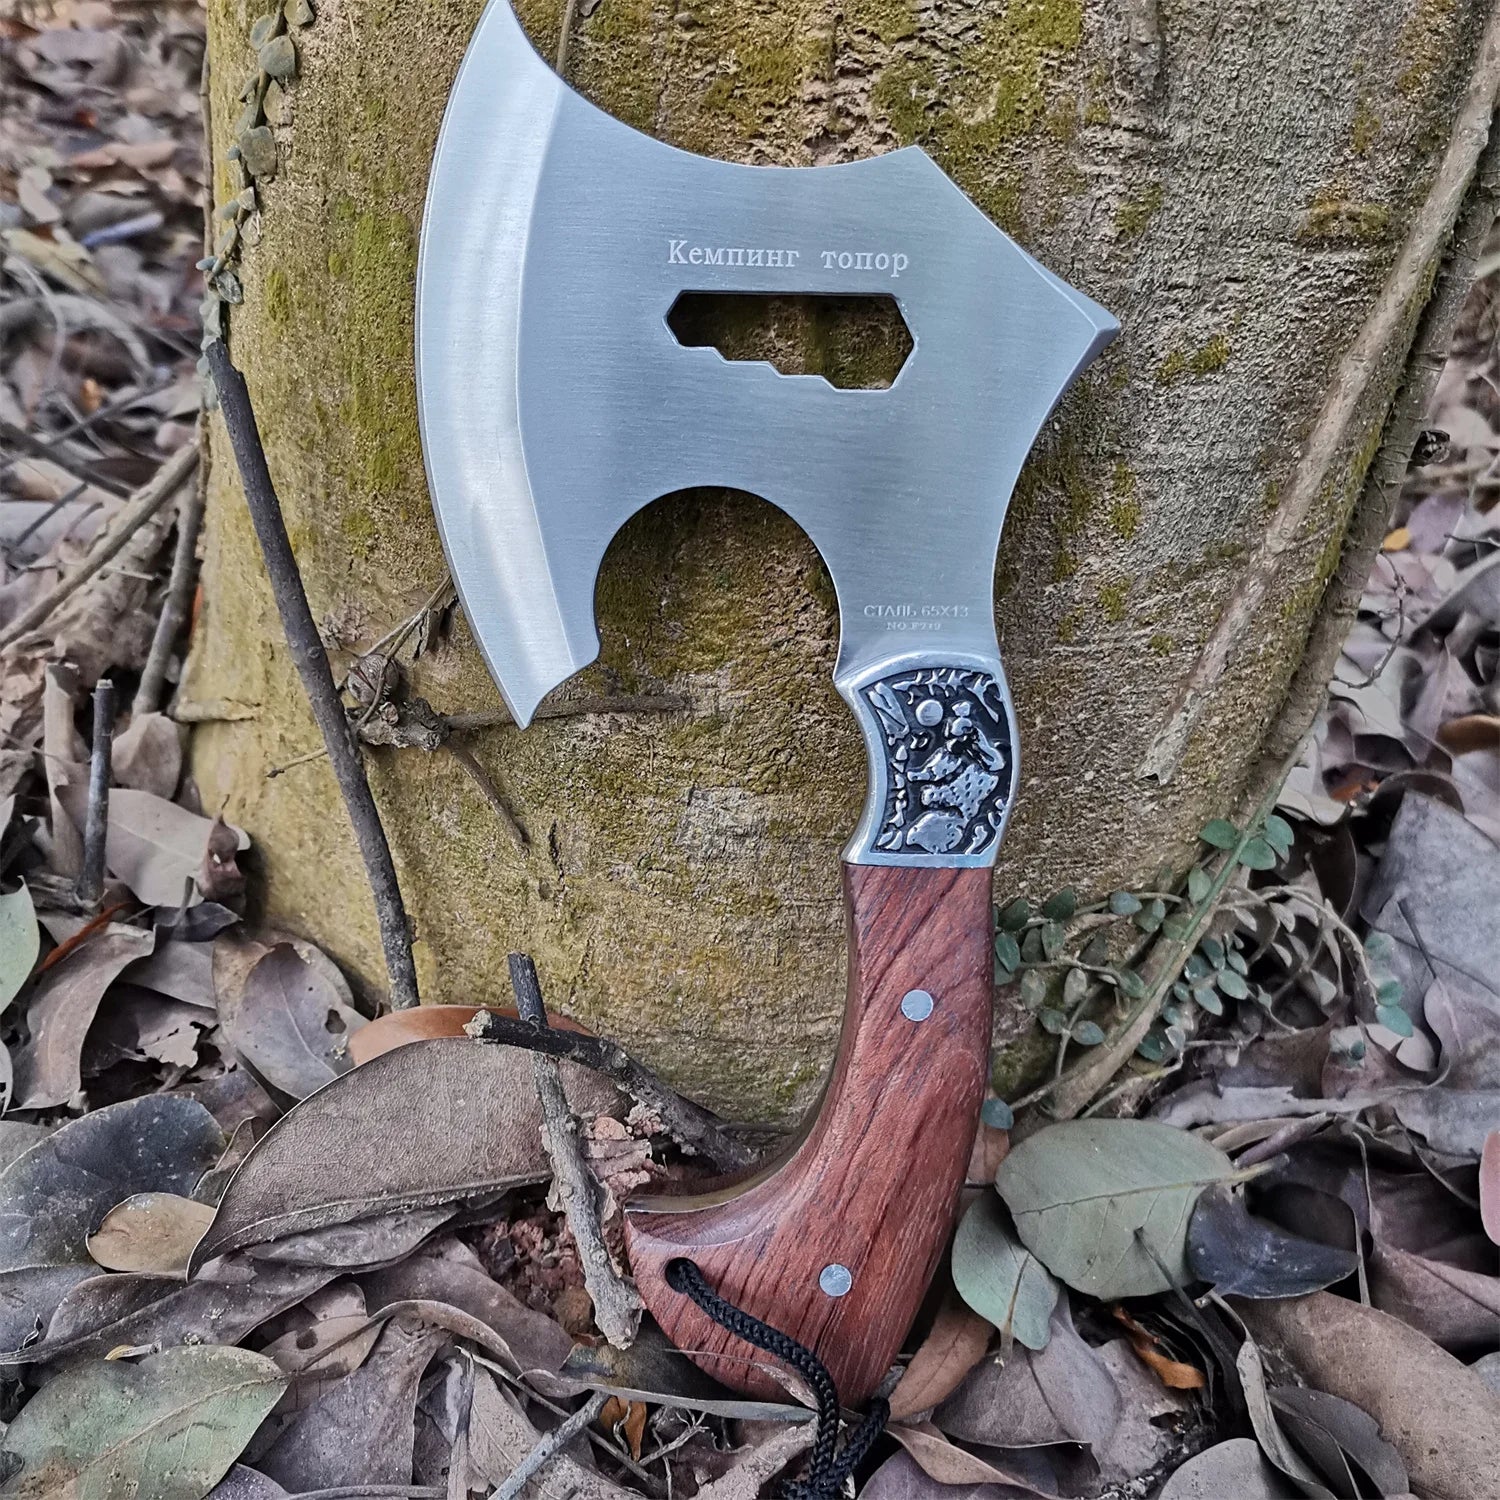 DB Axe Garden Tool - Compact Camping and Survival Hatchet with Sheath Tomahawk Army Outdoor Hunting Camping Survival Machete Axe